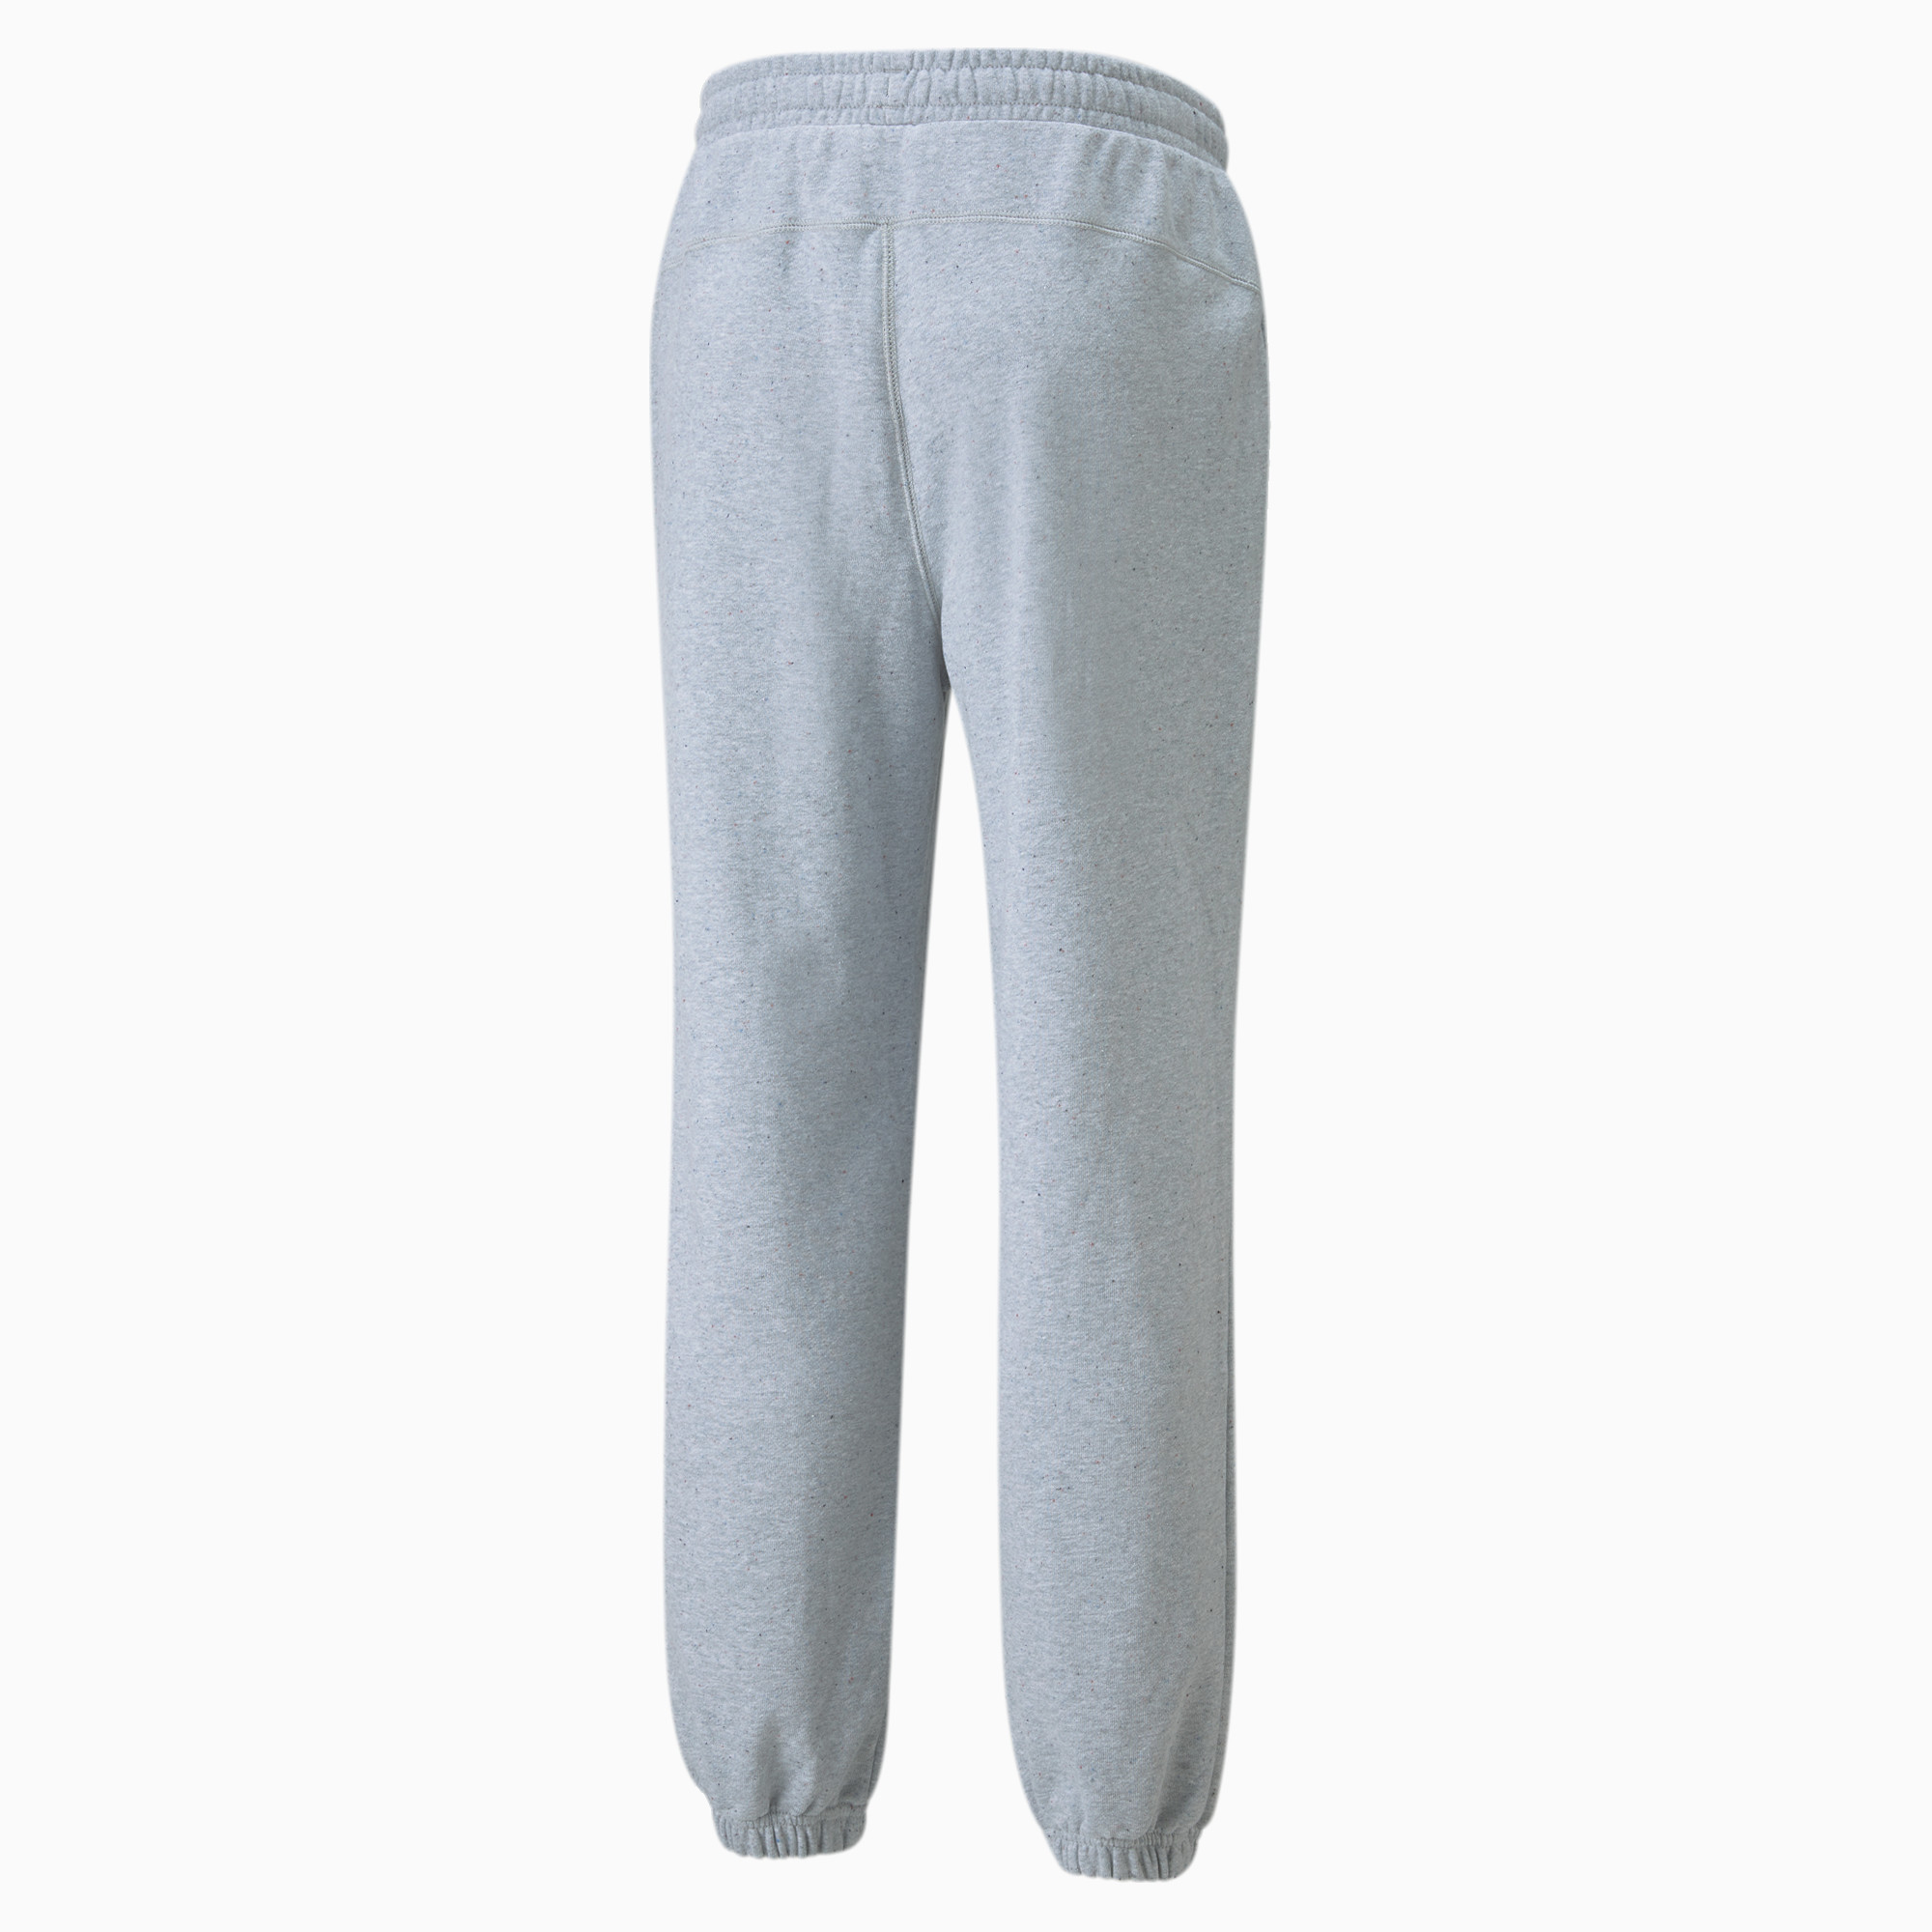 RE:Collection Relaxed Men's Pants, Light Gray Heather